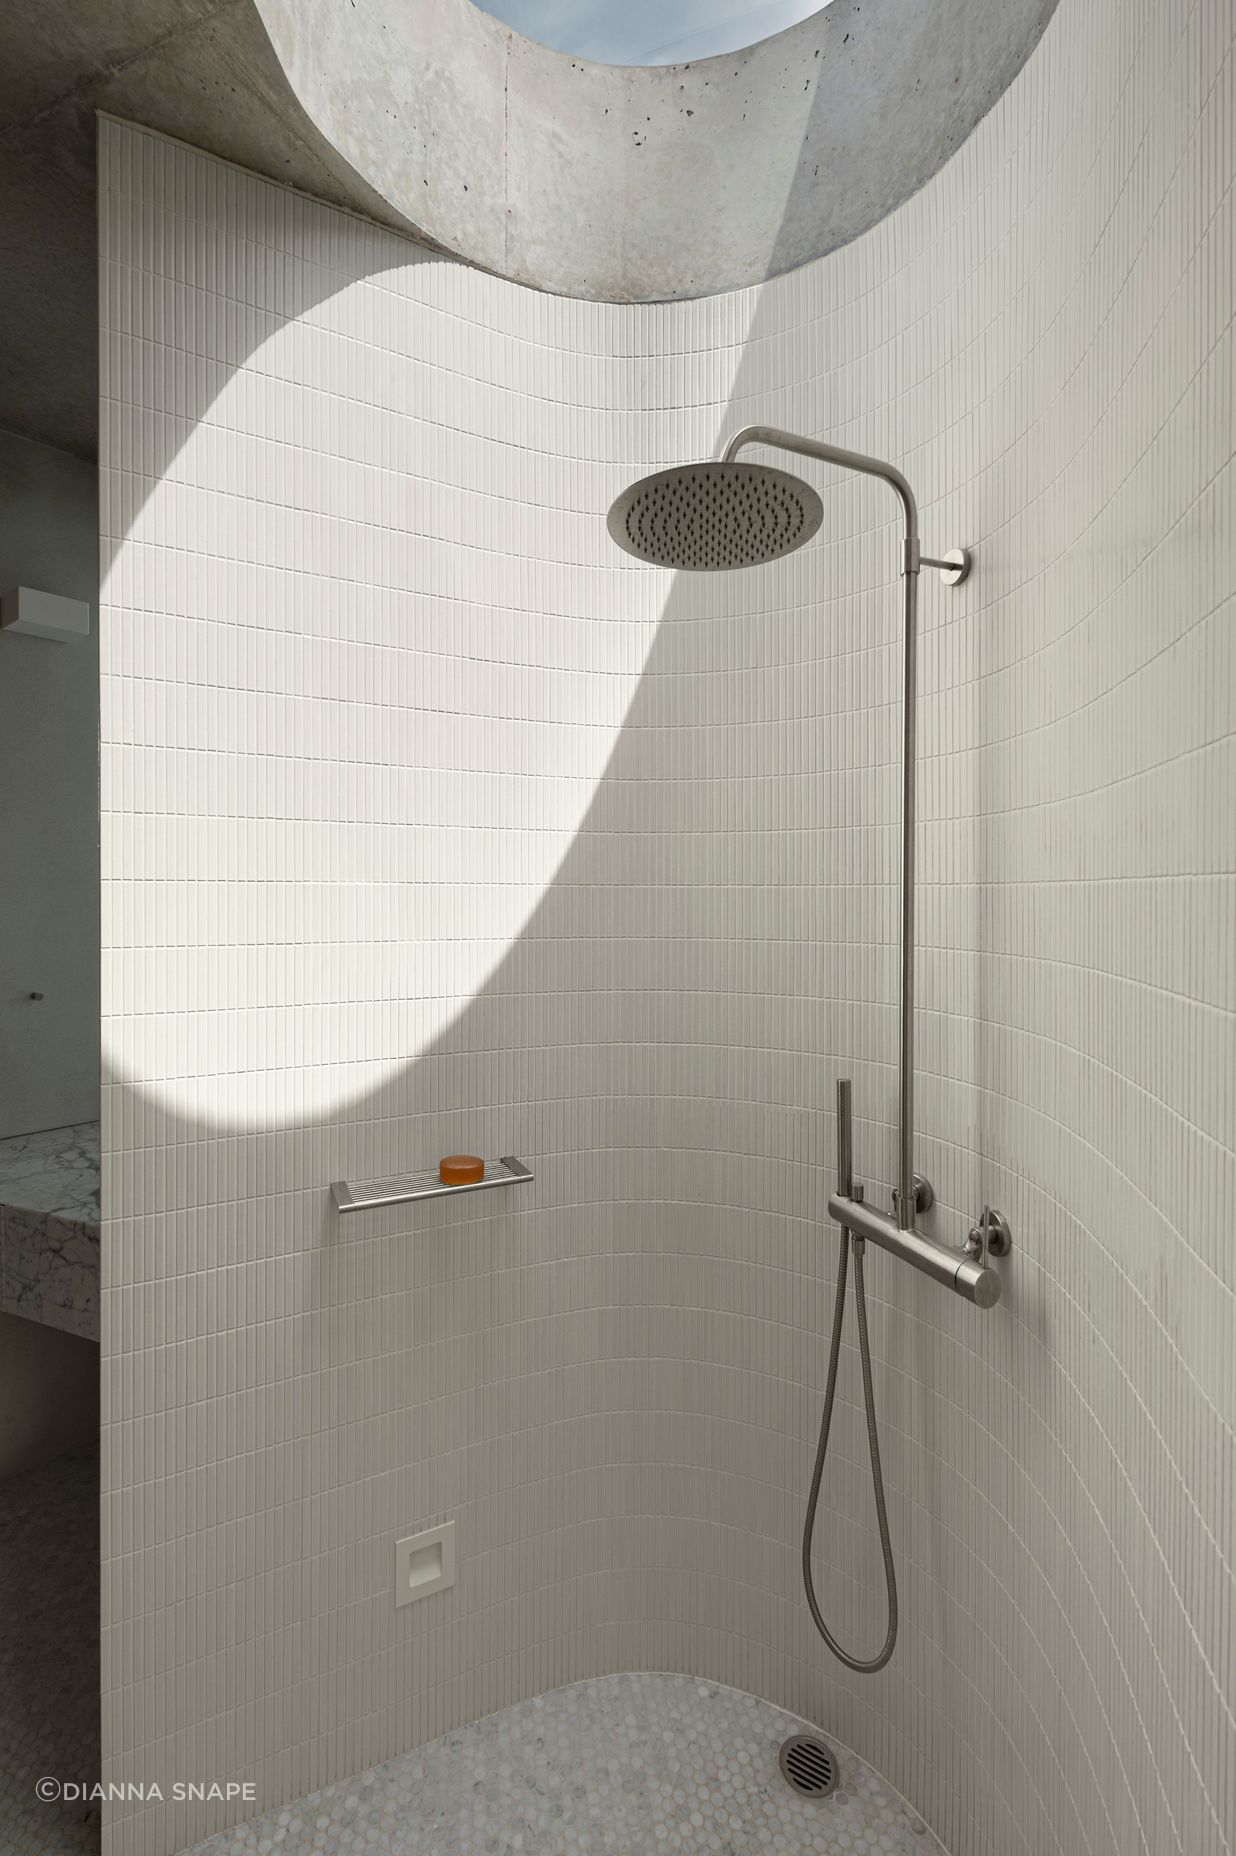 The curves of the shower room are echoed in the circular skylight.